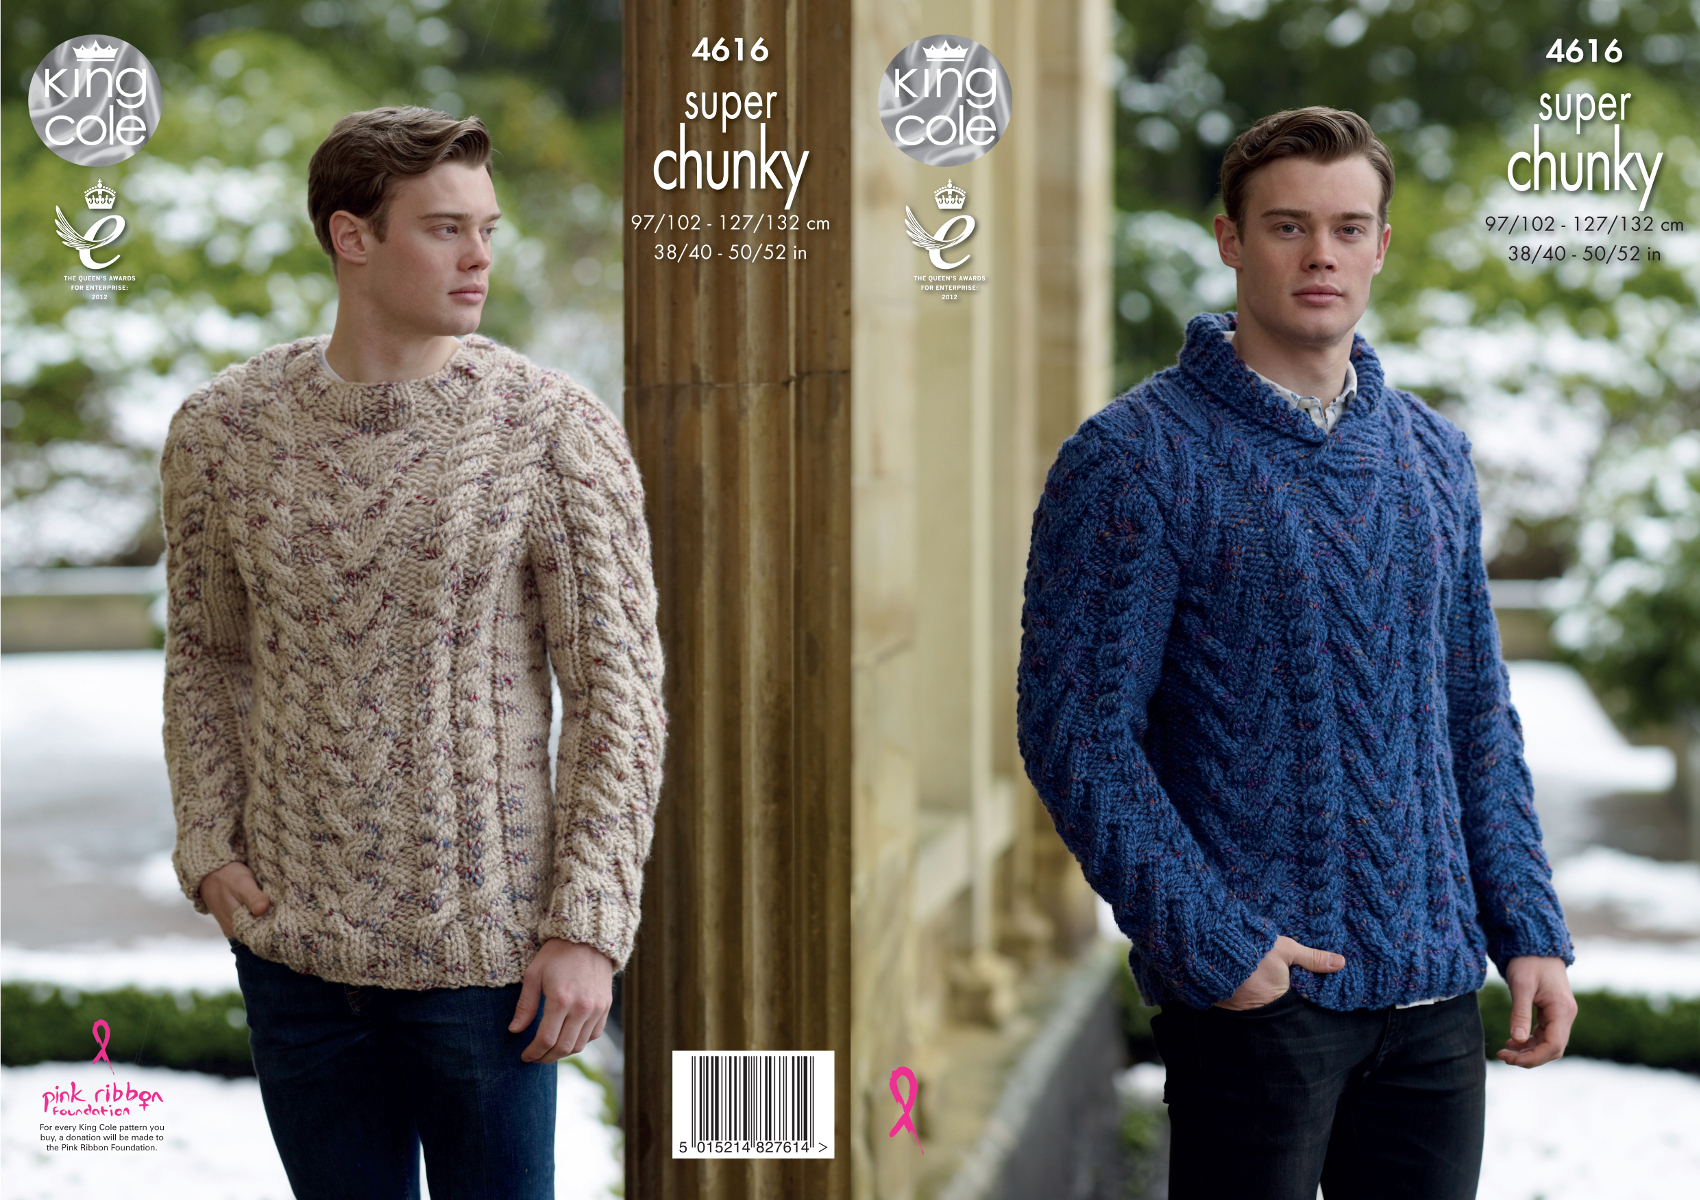 Knitting Pattern Mens Cardigan Details About King Cole Mens Super Chunky Knitting Pattern Round Neck Or Collar Sweater 4616